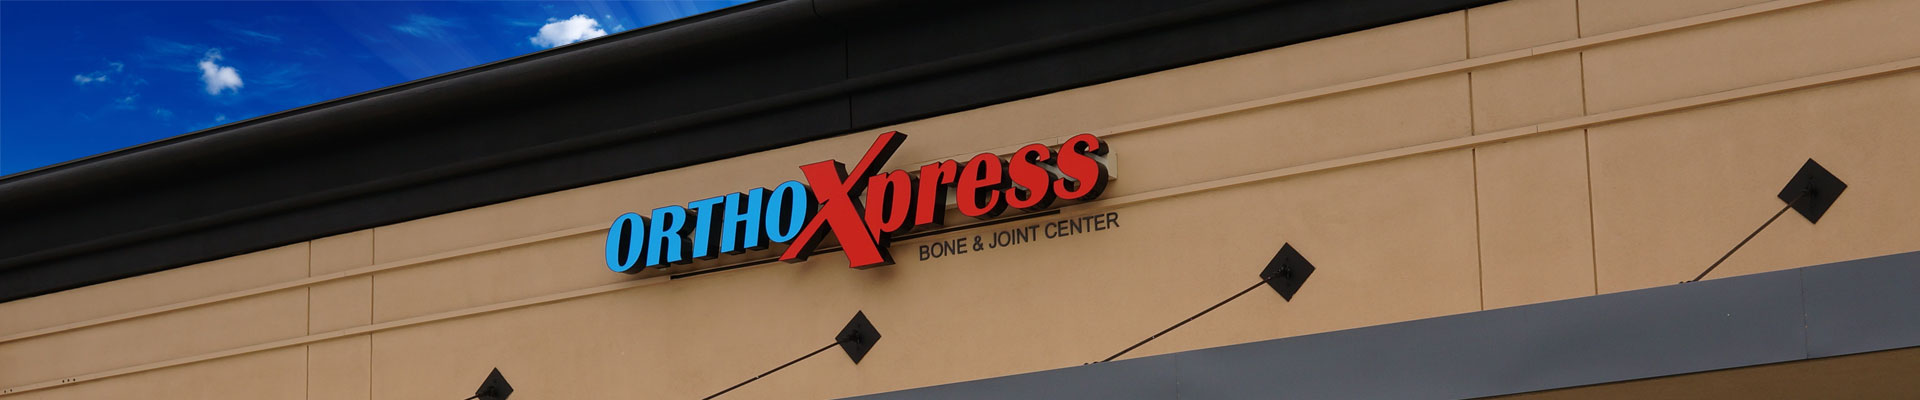 Ortho Xpress Bone and Joint Center